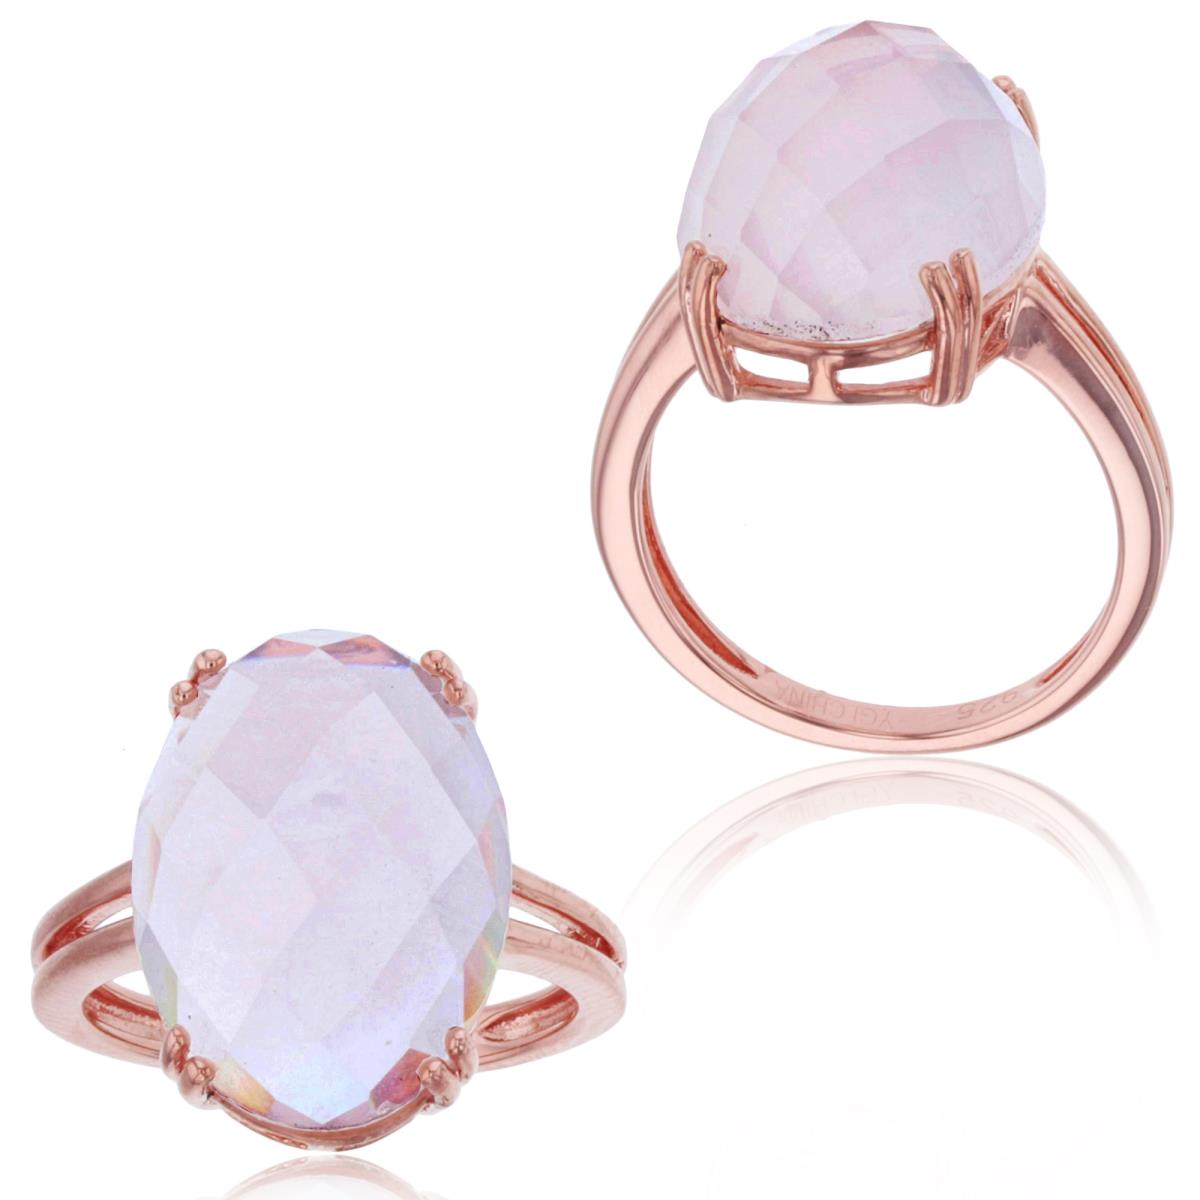 Sterling Silver+1Micron Rose Gold 18x13mm Oval Pink Quartz Ring